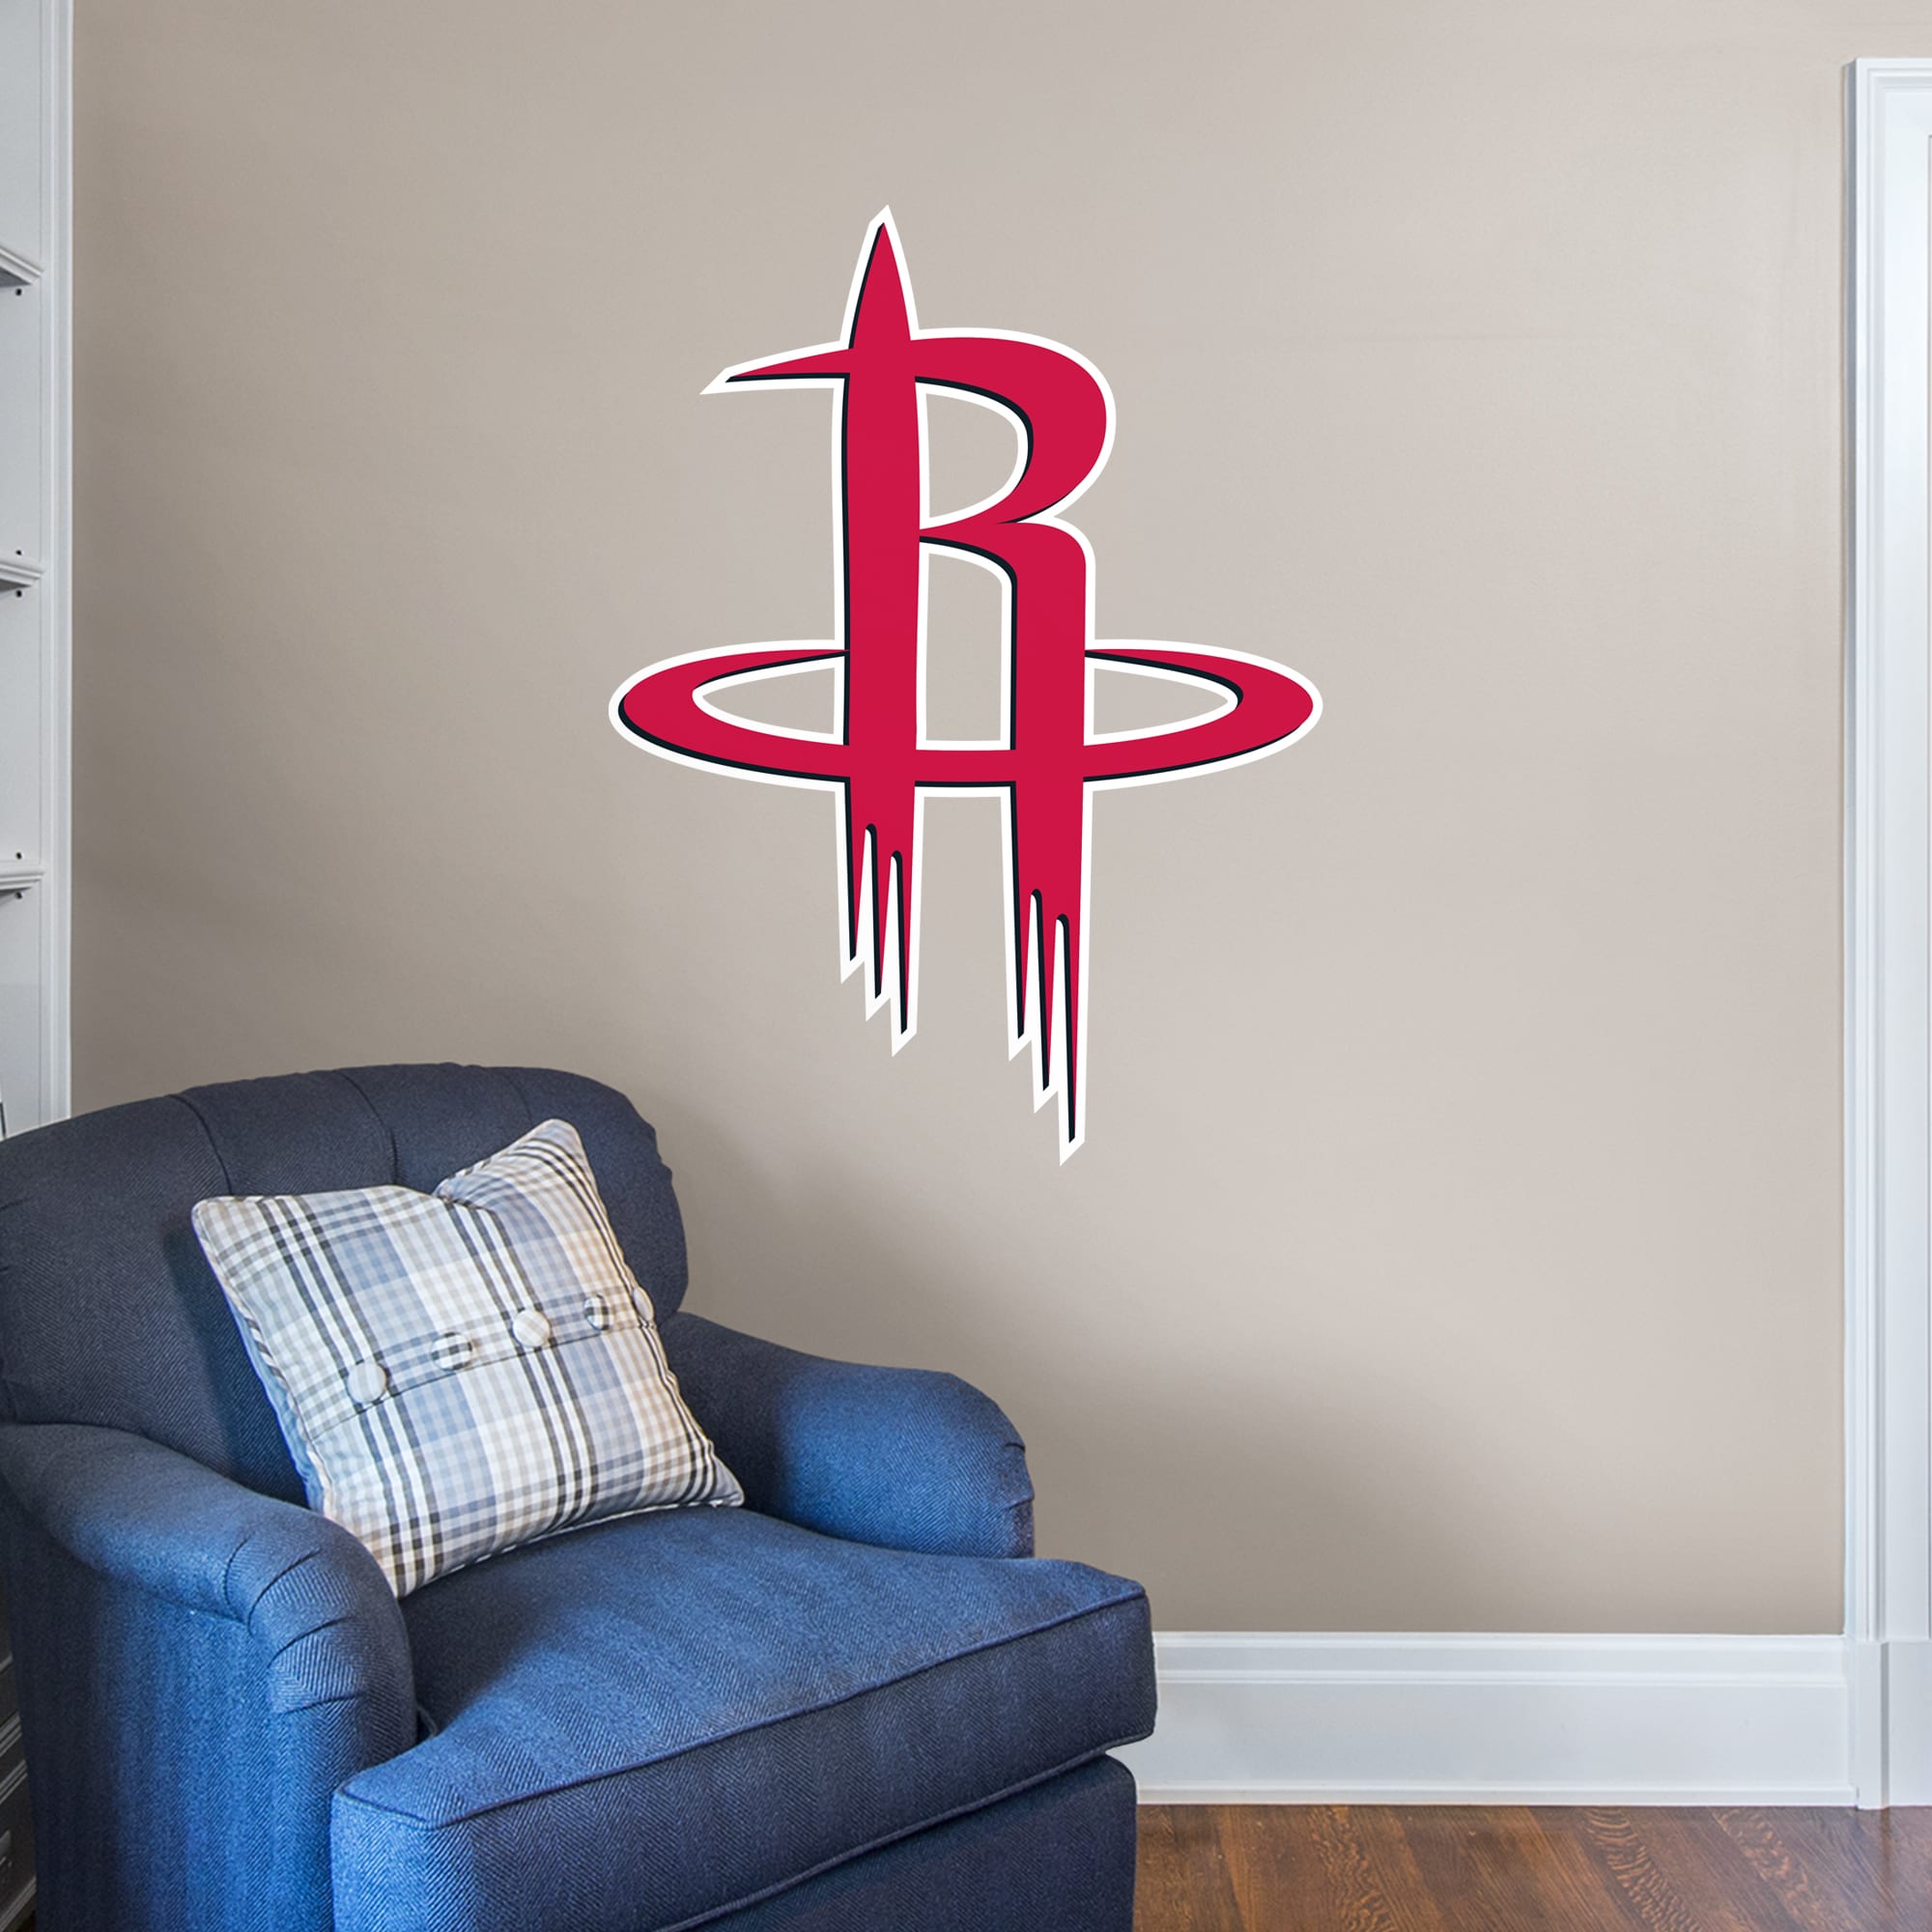 Houston Rockets: Logo - Officially Licensed NBA Removable Wall Decal Giant Logo (36"W x 48"H) by Fathead | Vinyl